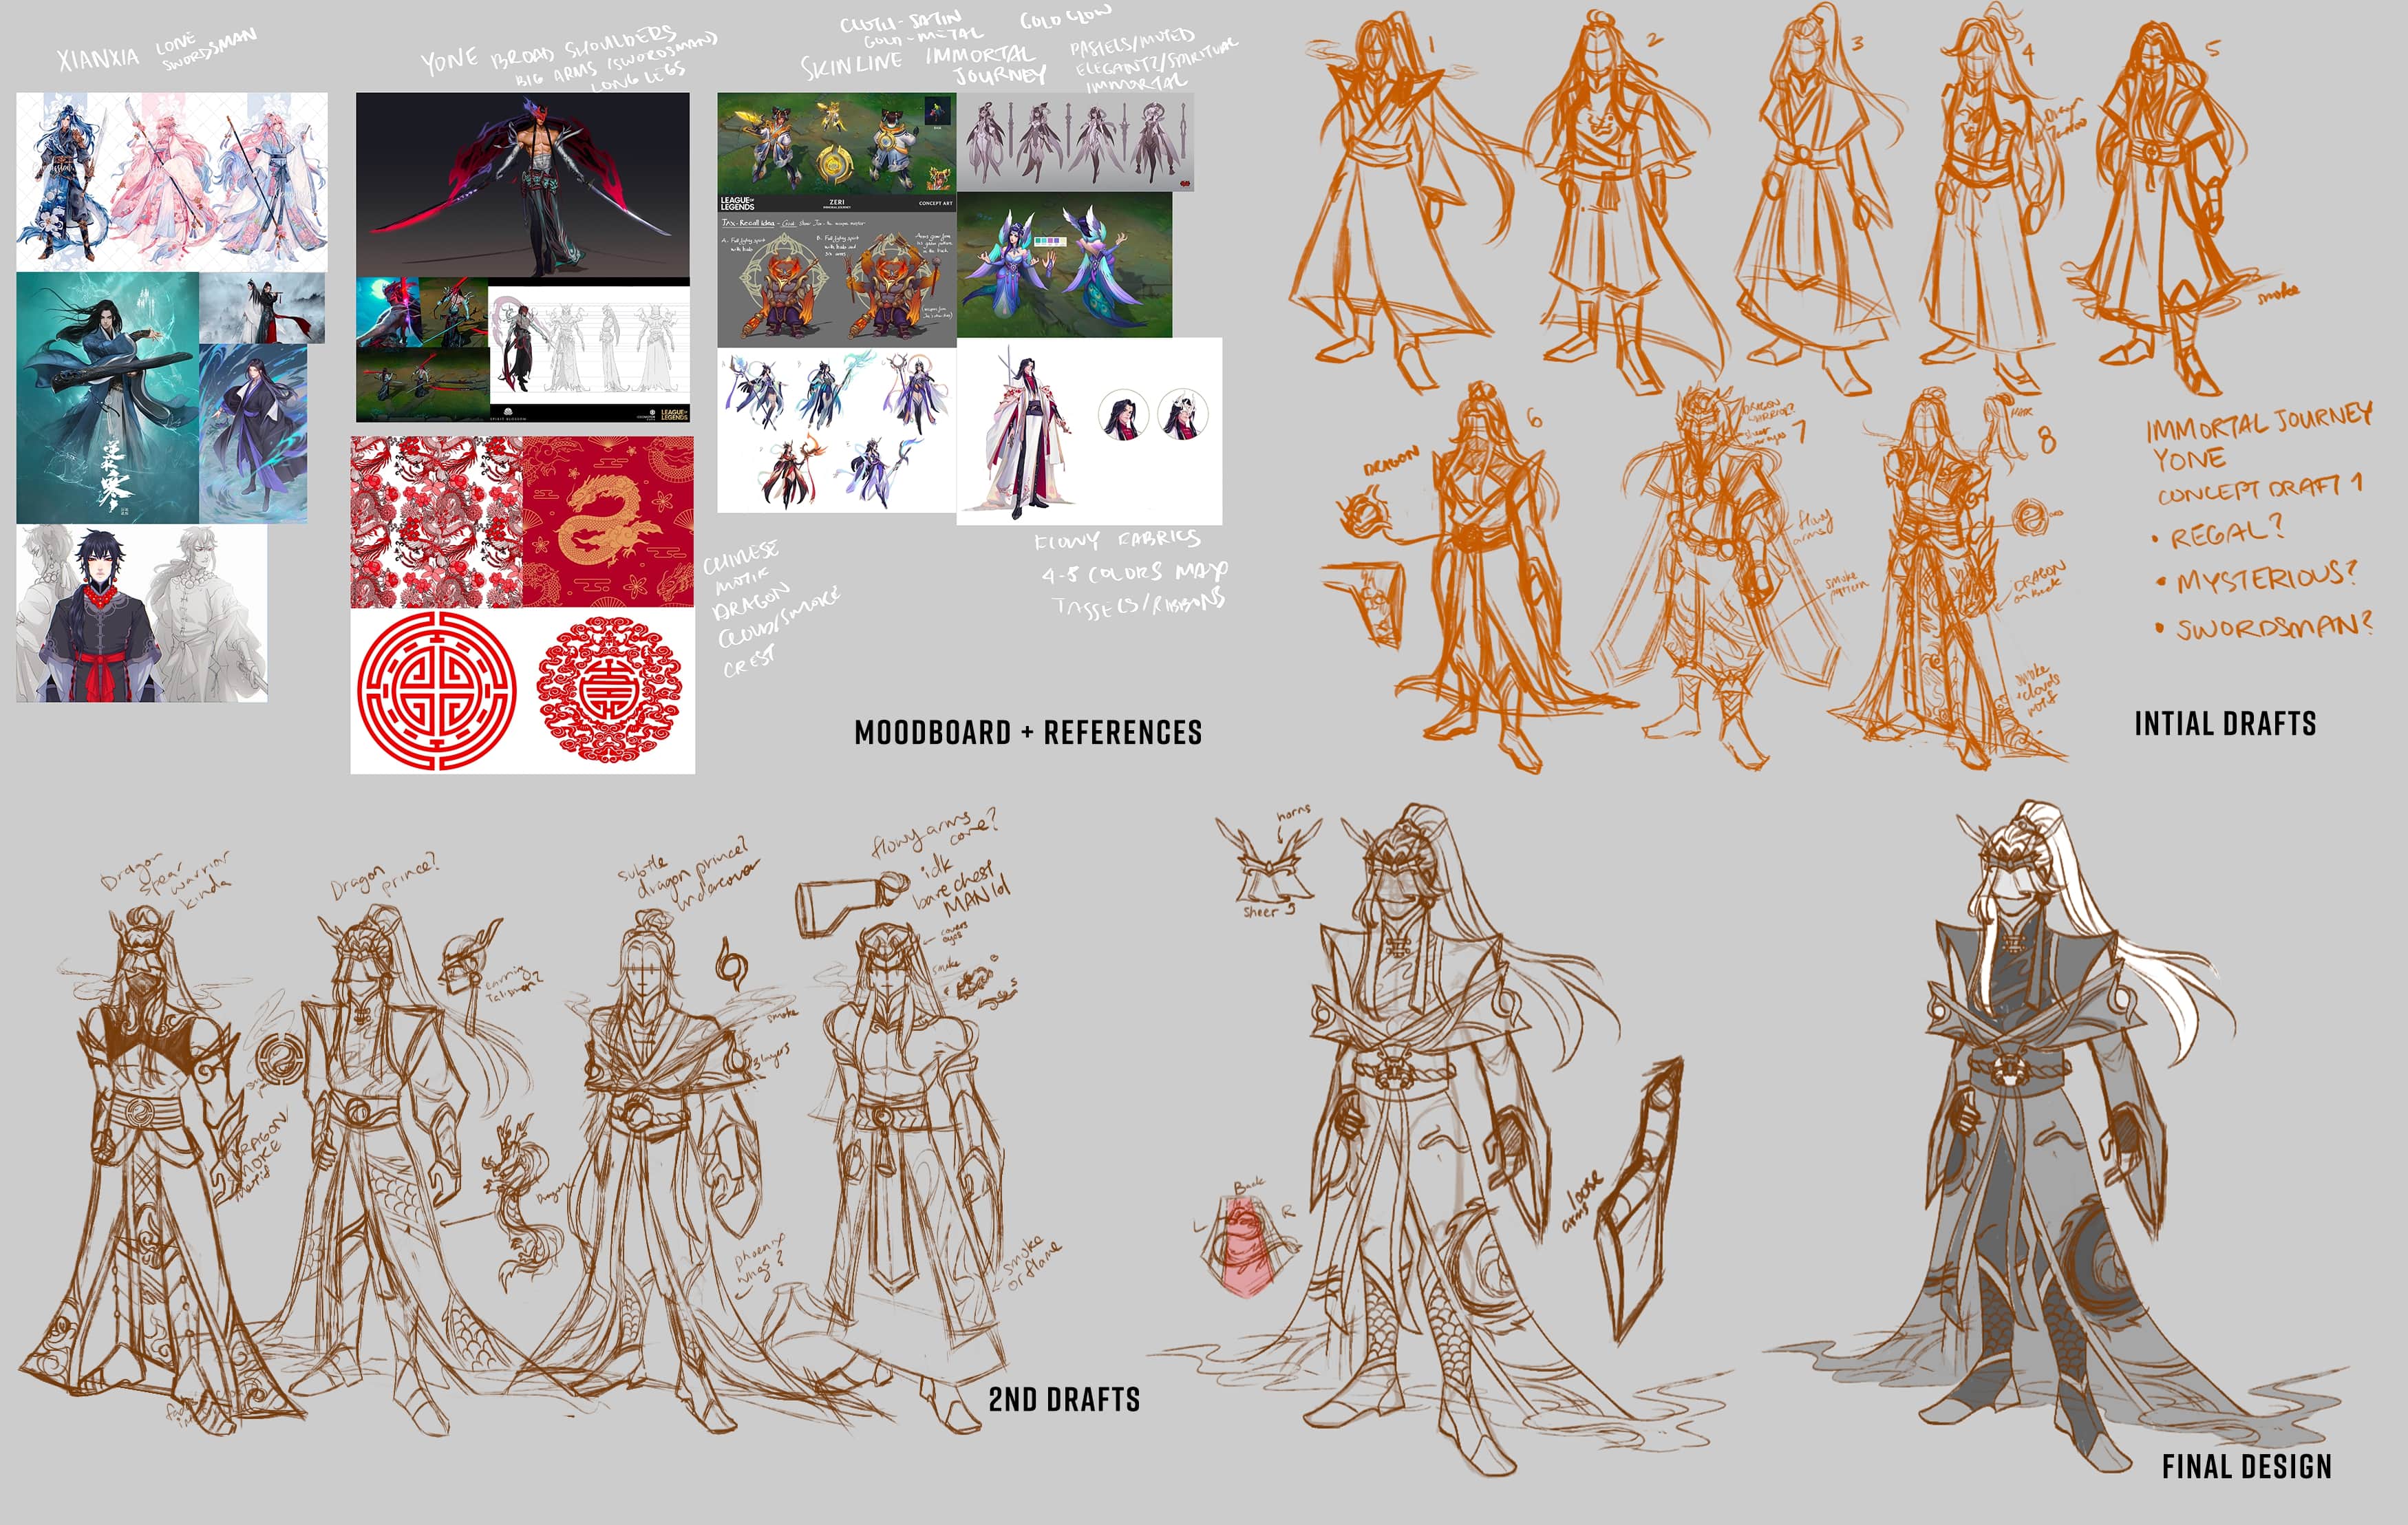 As a Chinese American and avid Cdrama enjoyer, I really loved the Immortal Journey skinline that Riot released in 2023 that focused on the idea of Xianxias and Chinese Fantasy which is a huge passion of mine. As a result, I started to explore some skin concepts for Yone since he was my favorite character.
			||
			After my 1st drafts, the release of Heavenscale skinline came out that focused on the core theme of dragons due to Chinese Lunar New Year being the Year of the Dragon and I noticed my skin ideas were heavily influenced by dragons and the idea of immortality and decided to shift the skinline to Heavenscale instead. This resulted in another line of drafts focusing on different ideas of dragons: Dragon prince, Dragon warrior, etc. In the end, I decided to solidify on the Regal Robes of an emperor as well as giving him multiple jade ornaments as well as a sheer veil similar to those of higher positions in the old Chinese Dynasty.
			